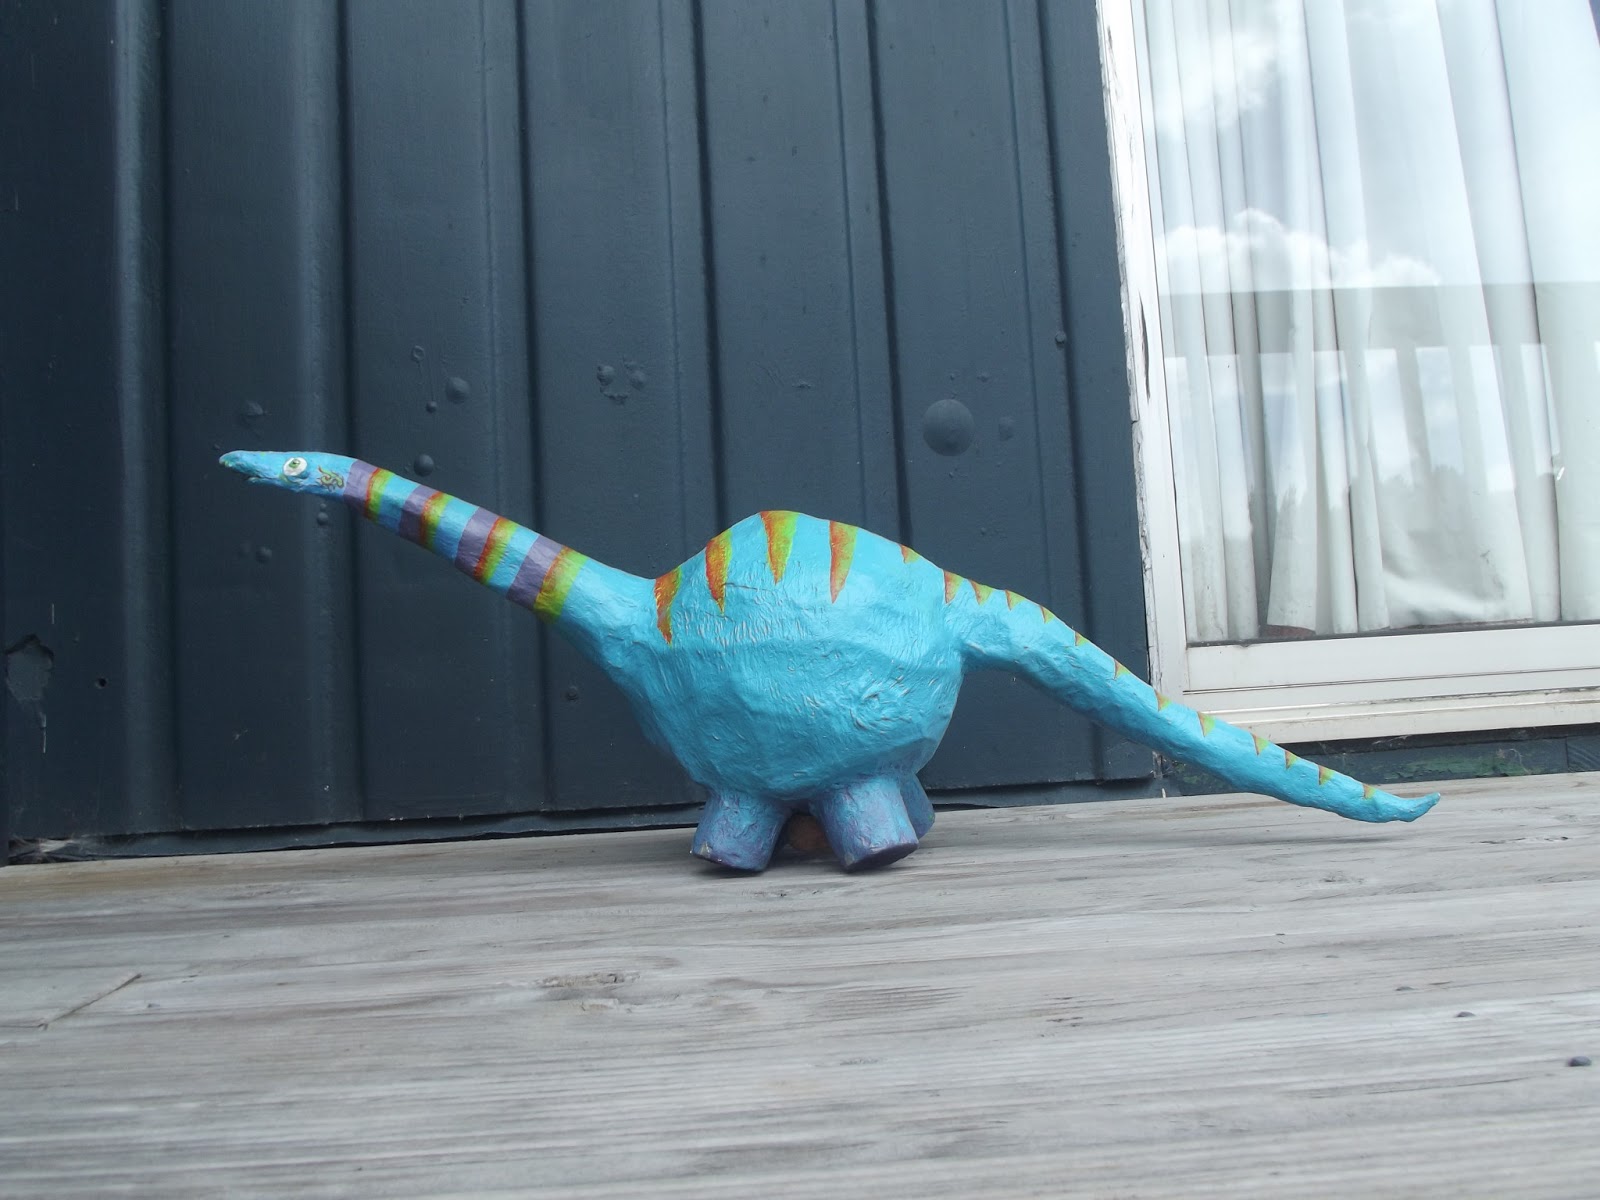 Nonnie's Blog: How to make paper mache dinosaur banks (step-by-step)